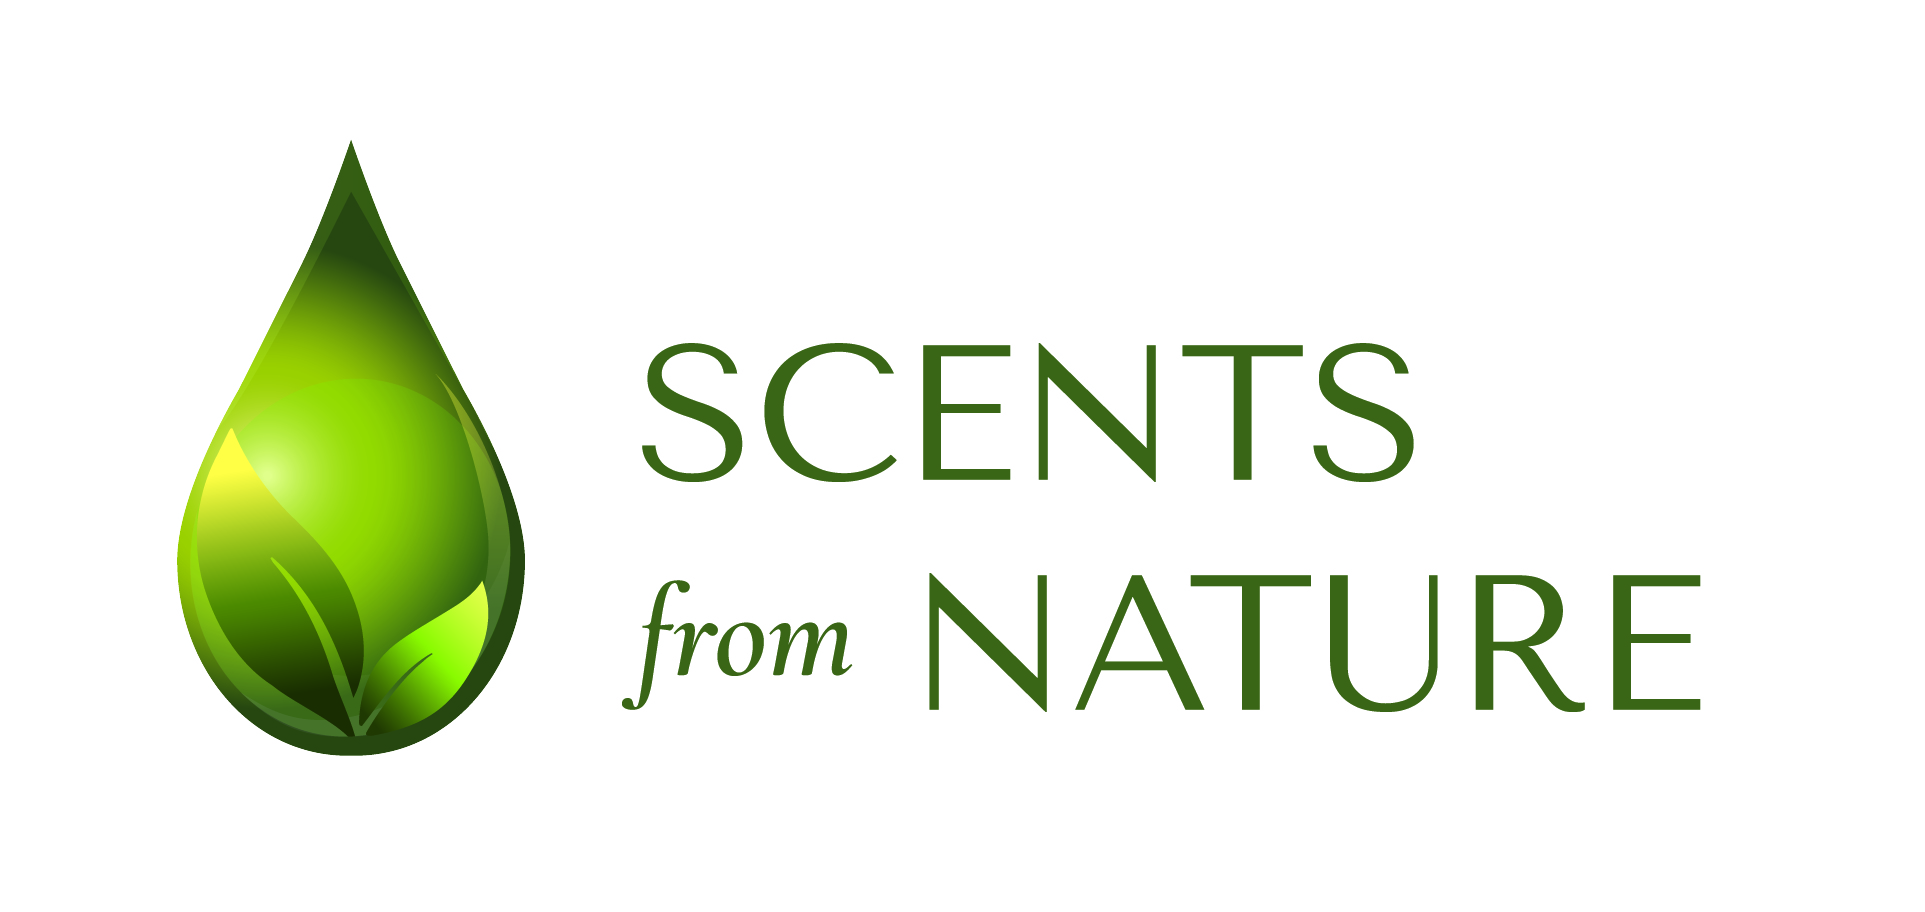 Scents from Nature - Natural Essential Oils Company